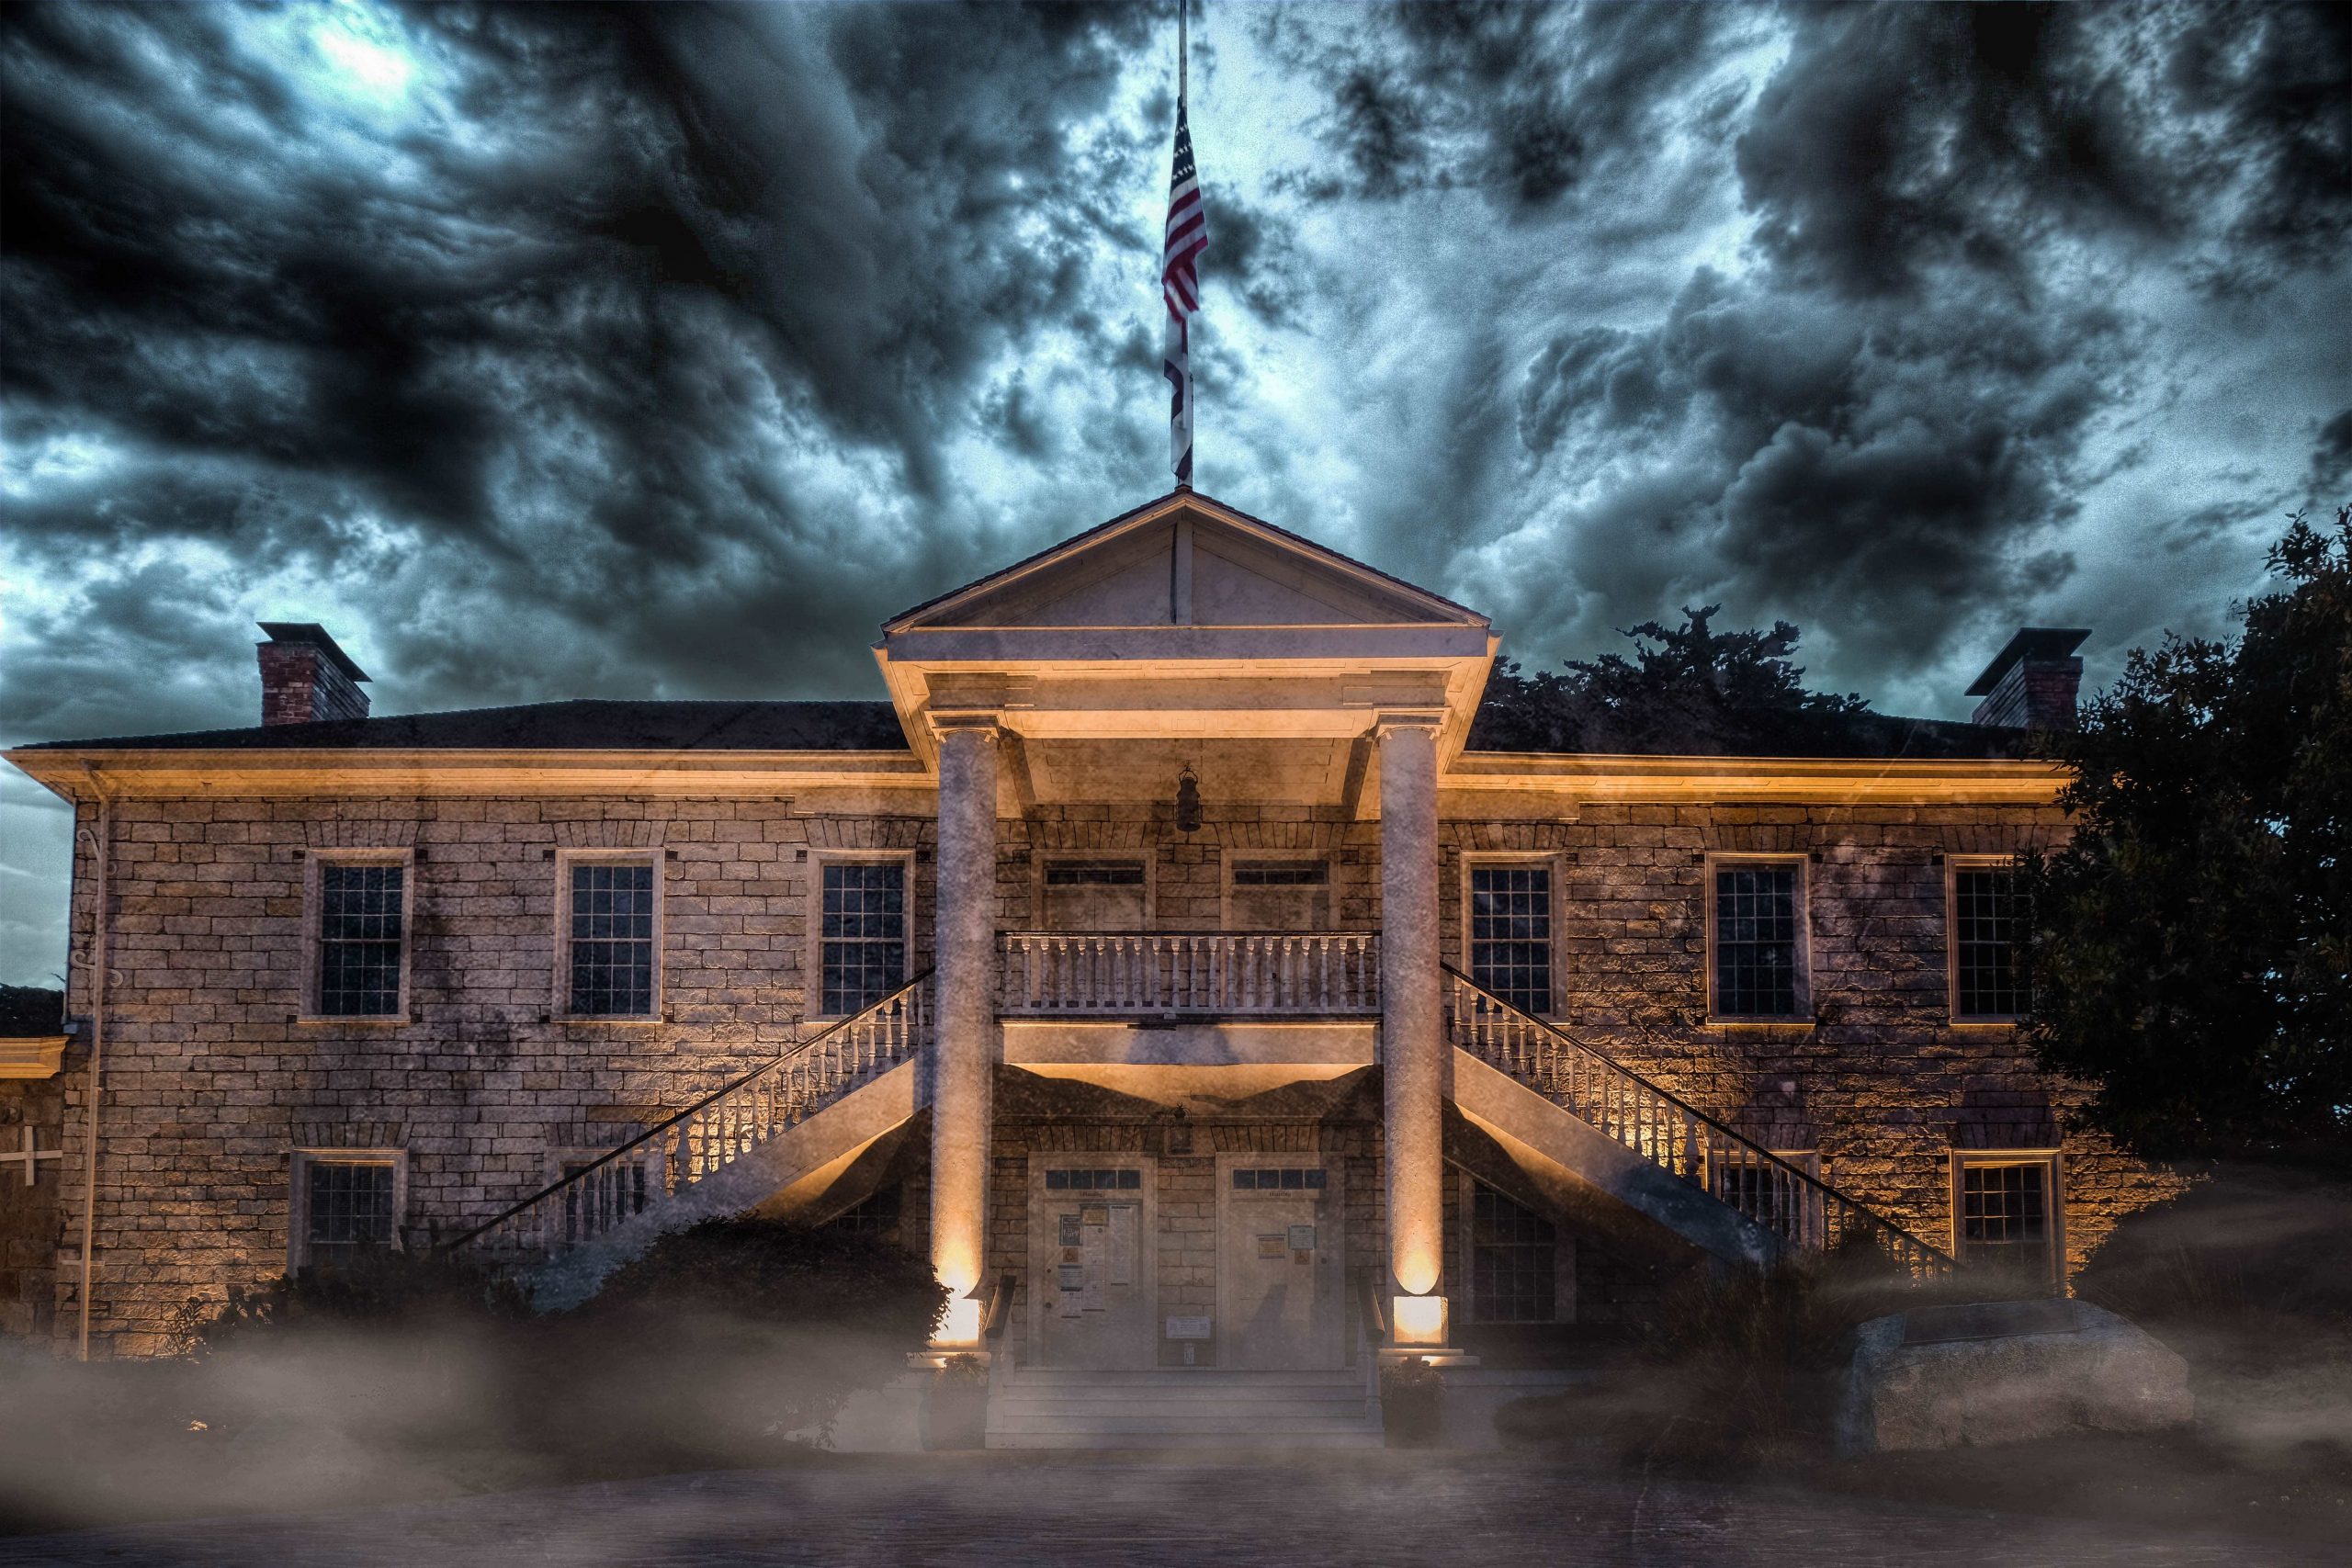 Mist and darkness surrounds Monterey's Colton Hall